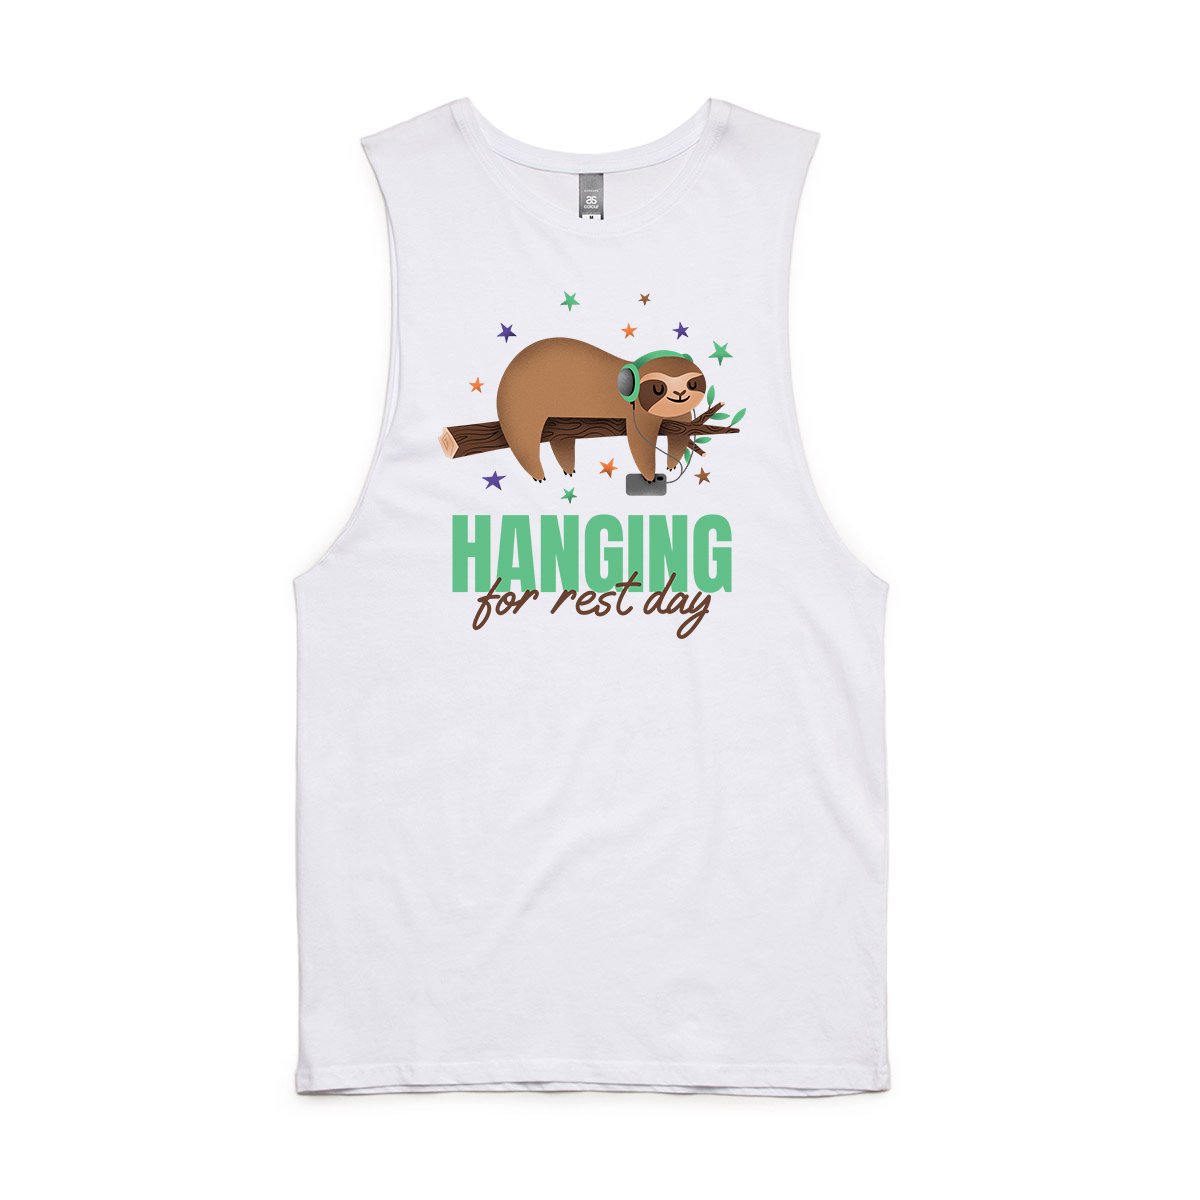 Hanging For Rest Day - Mens Tank Top Tee White Mens Tank Fitness Mens